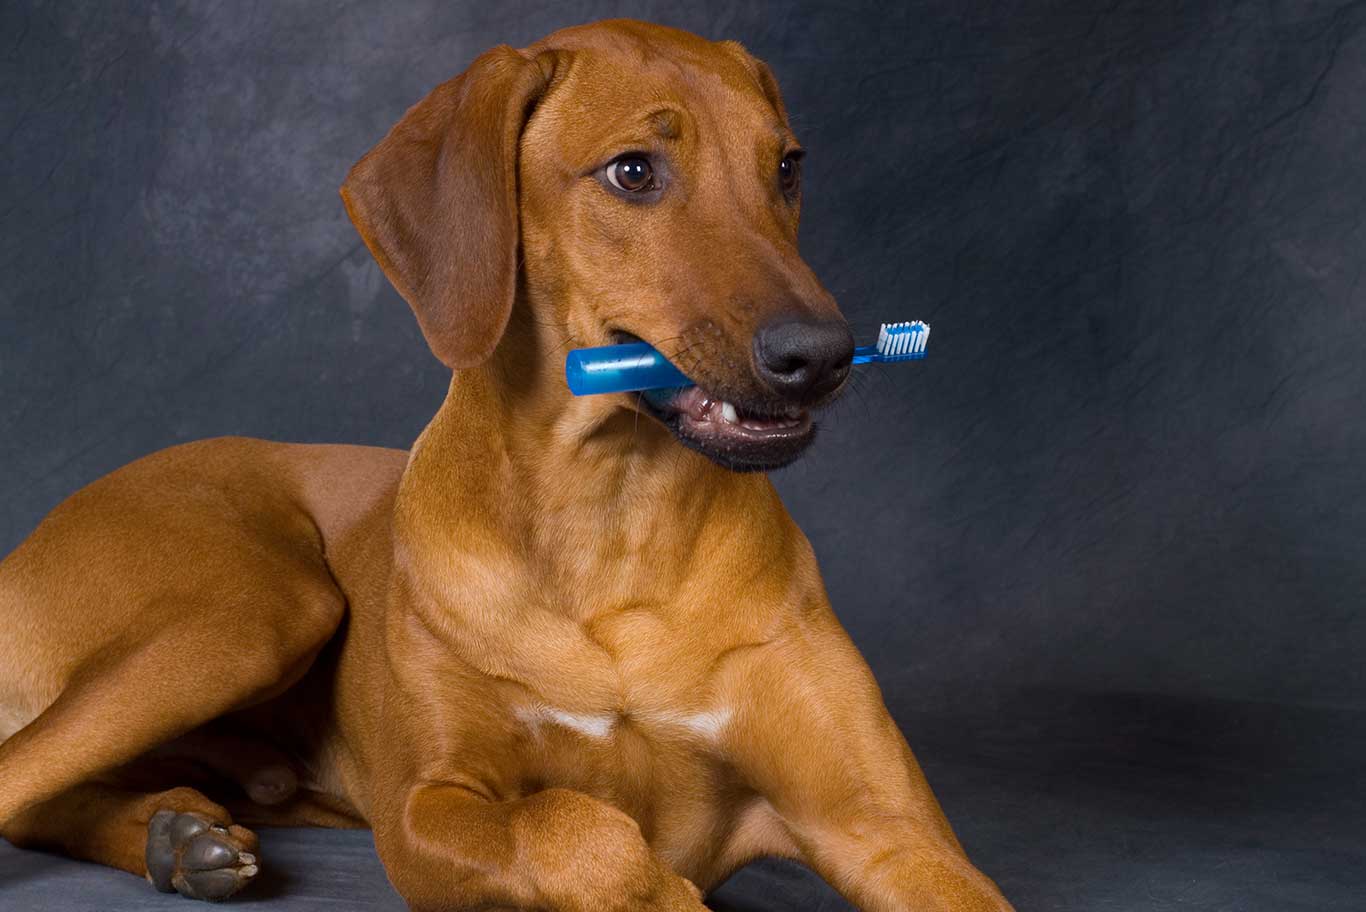 Brown dog holding toothbrush in his mouth